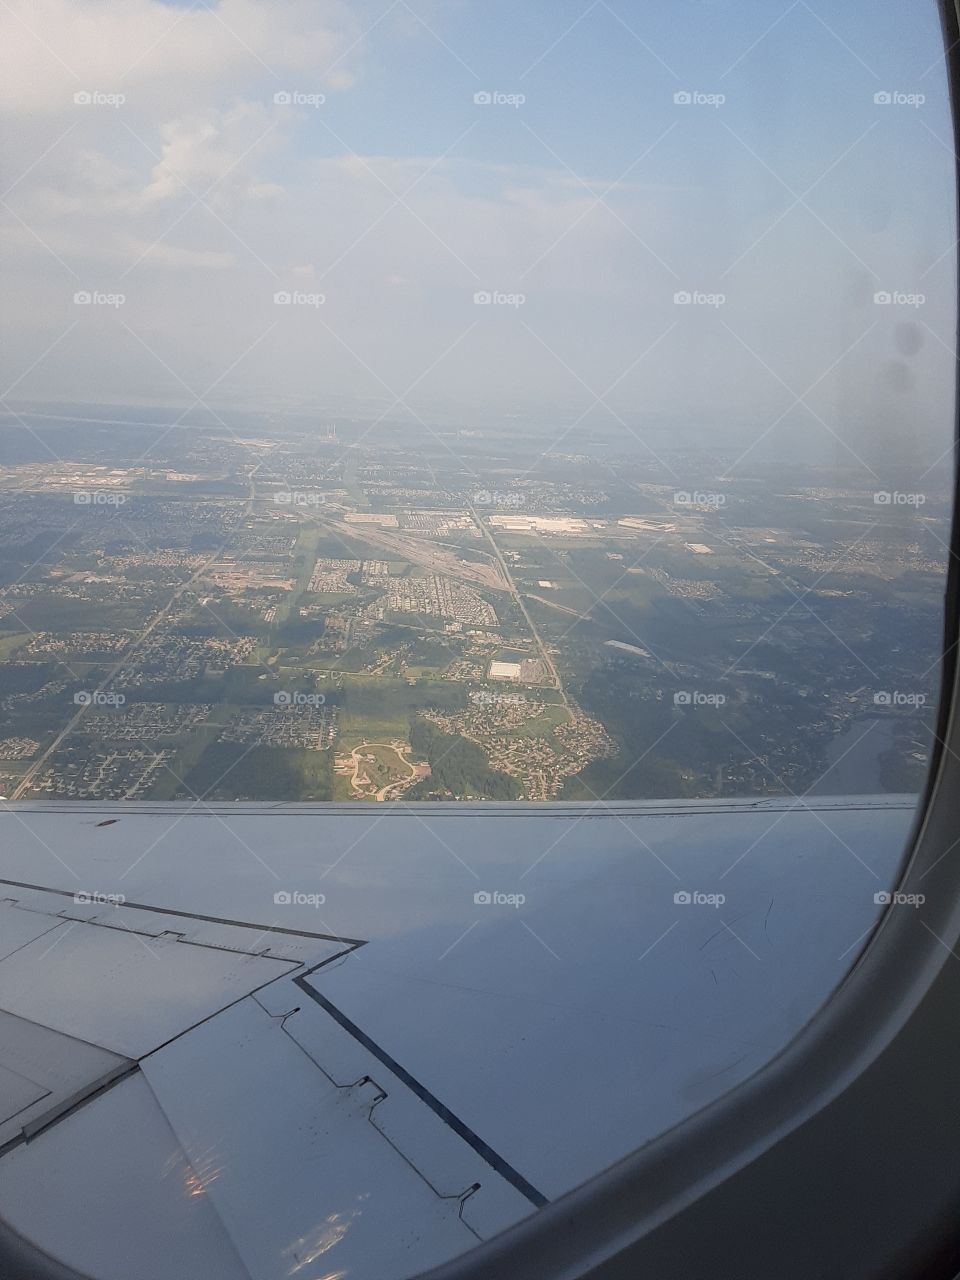 loved looking down from the plane